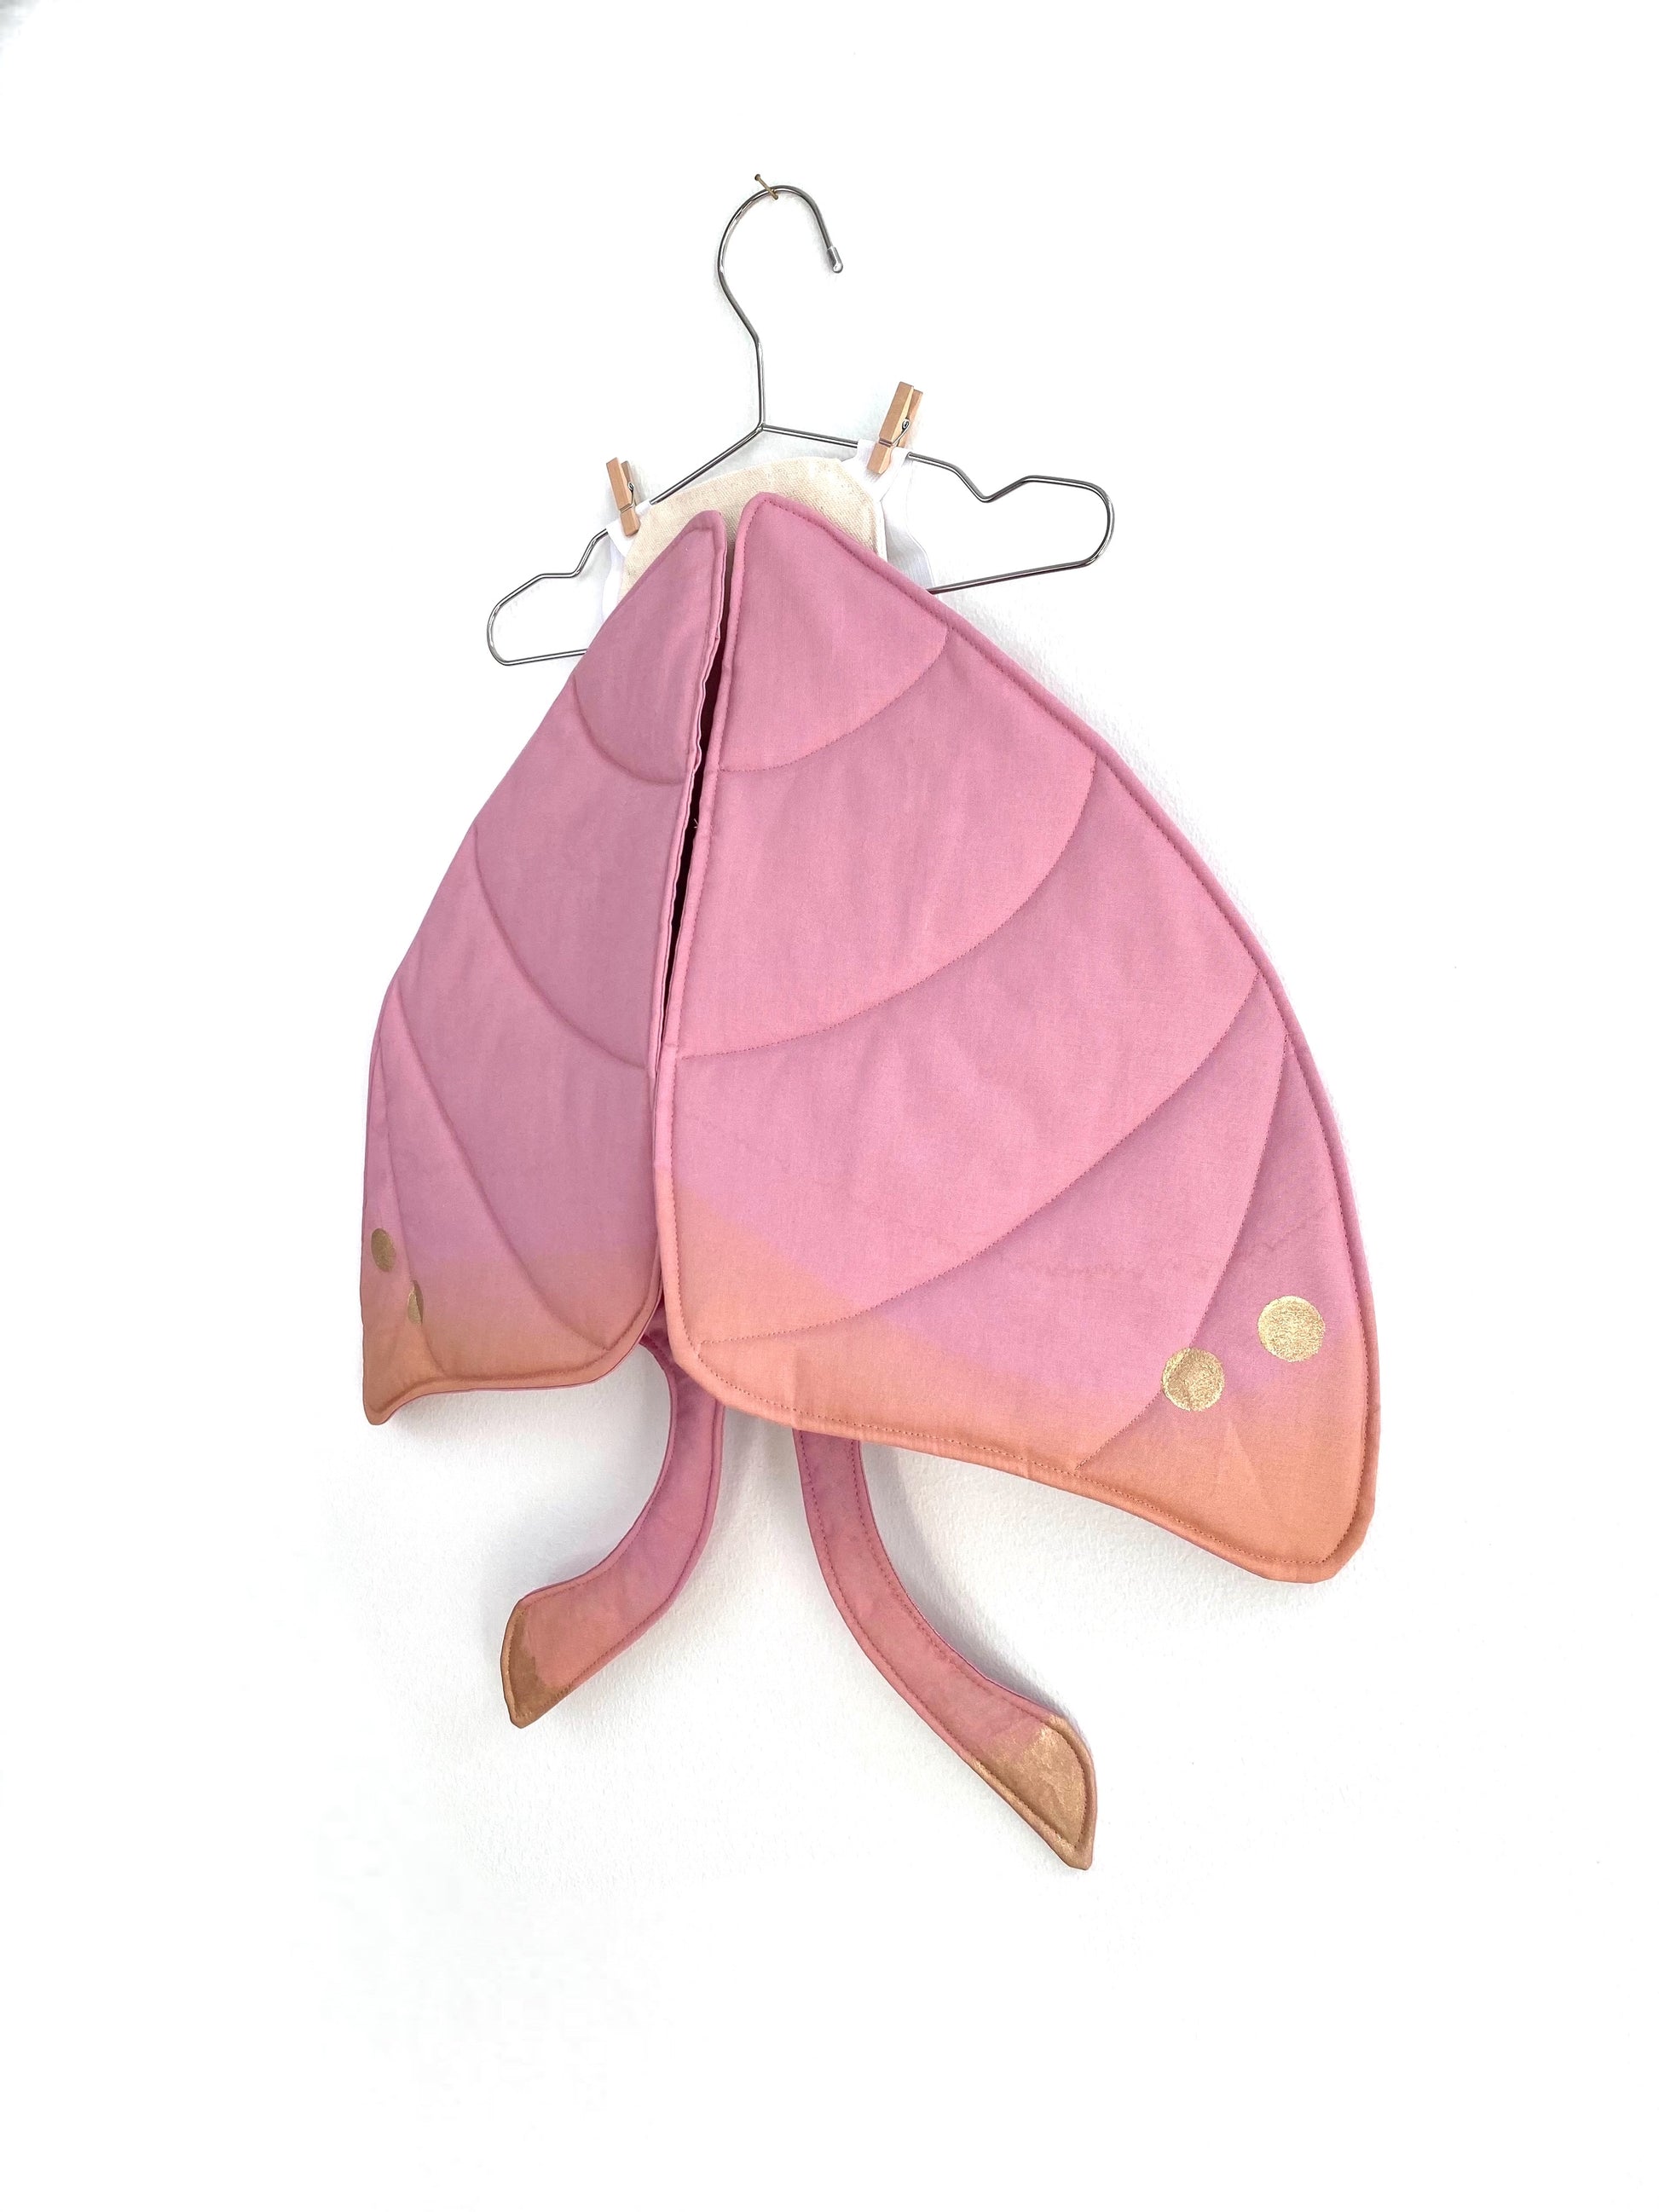 Pink moth wings for kids imaginary open-ended play time.